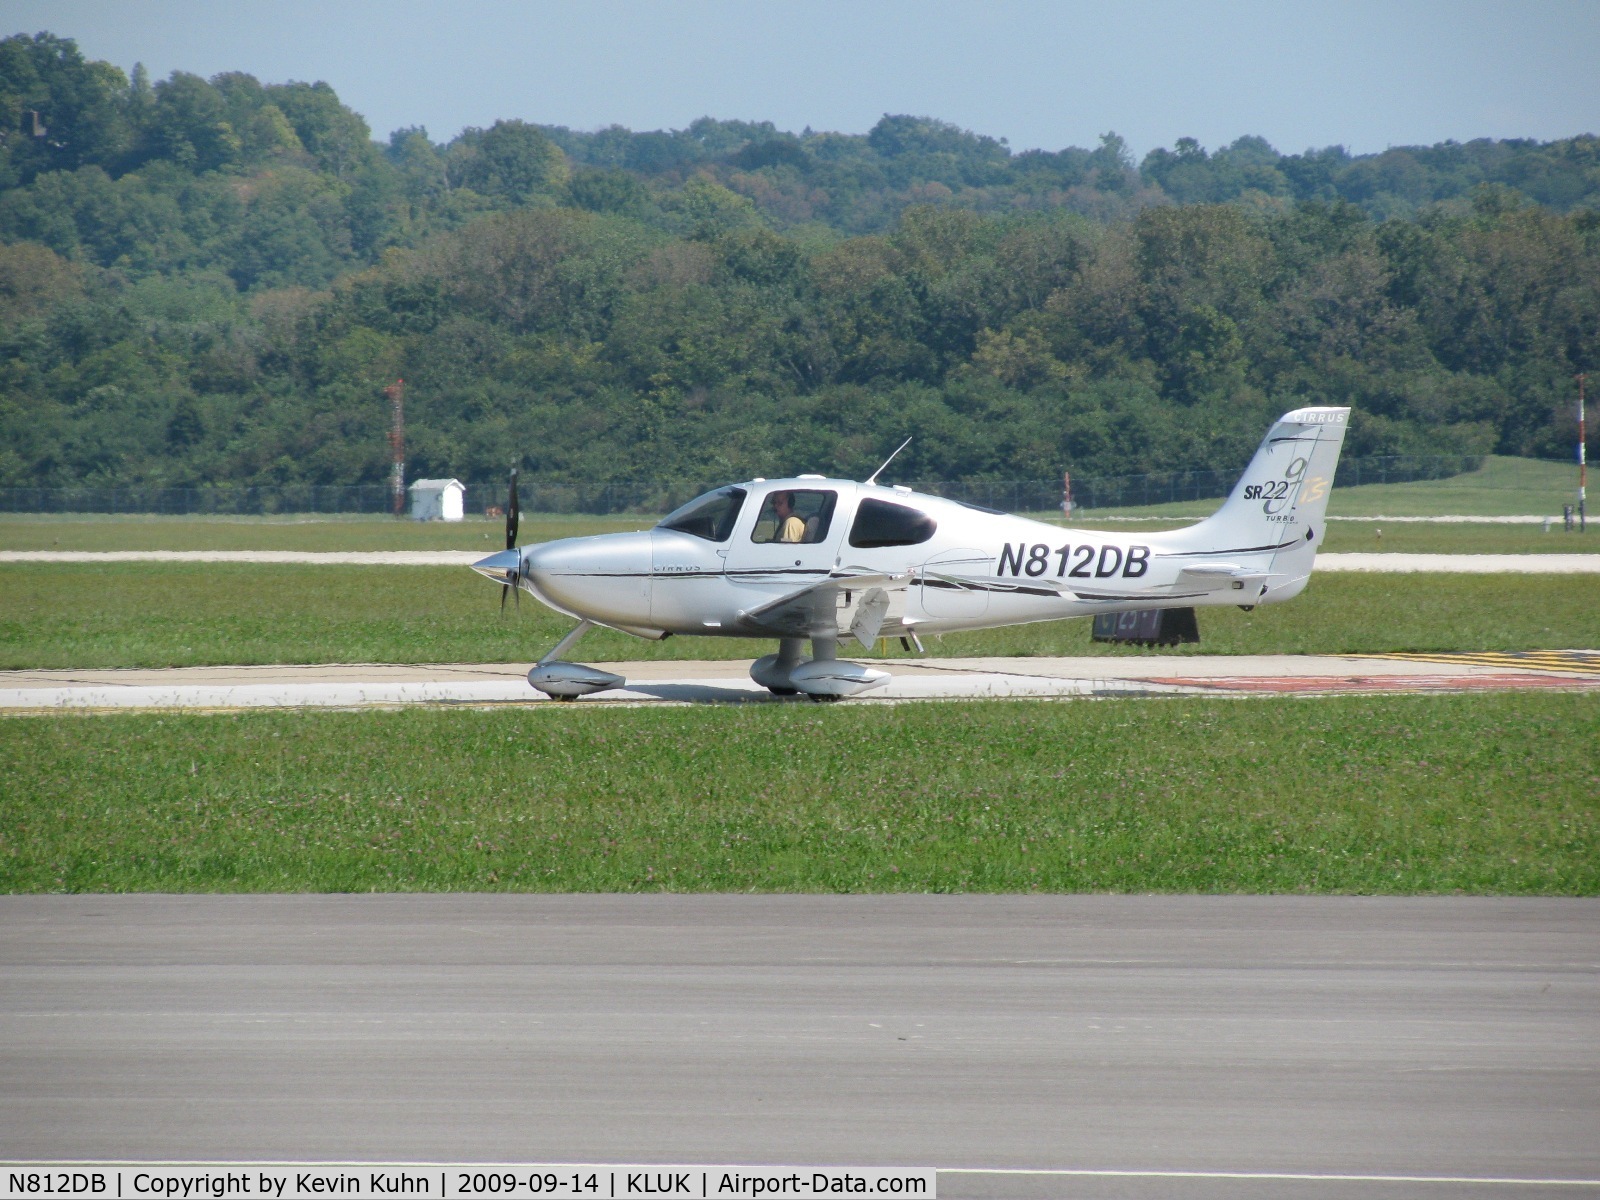 N812DB, 2007 Cirrus SR22 C/N 2399, I've tried in vain to understand the SR22's variations, but unfortunately it seems not even Cirrus is totally clear on all of them! An SR22 GTS Turbo, going by the tail.